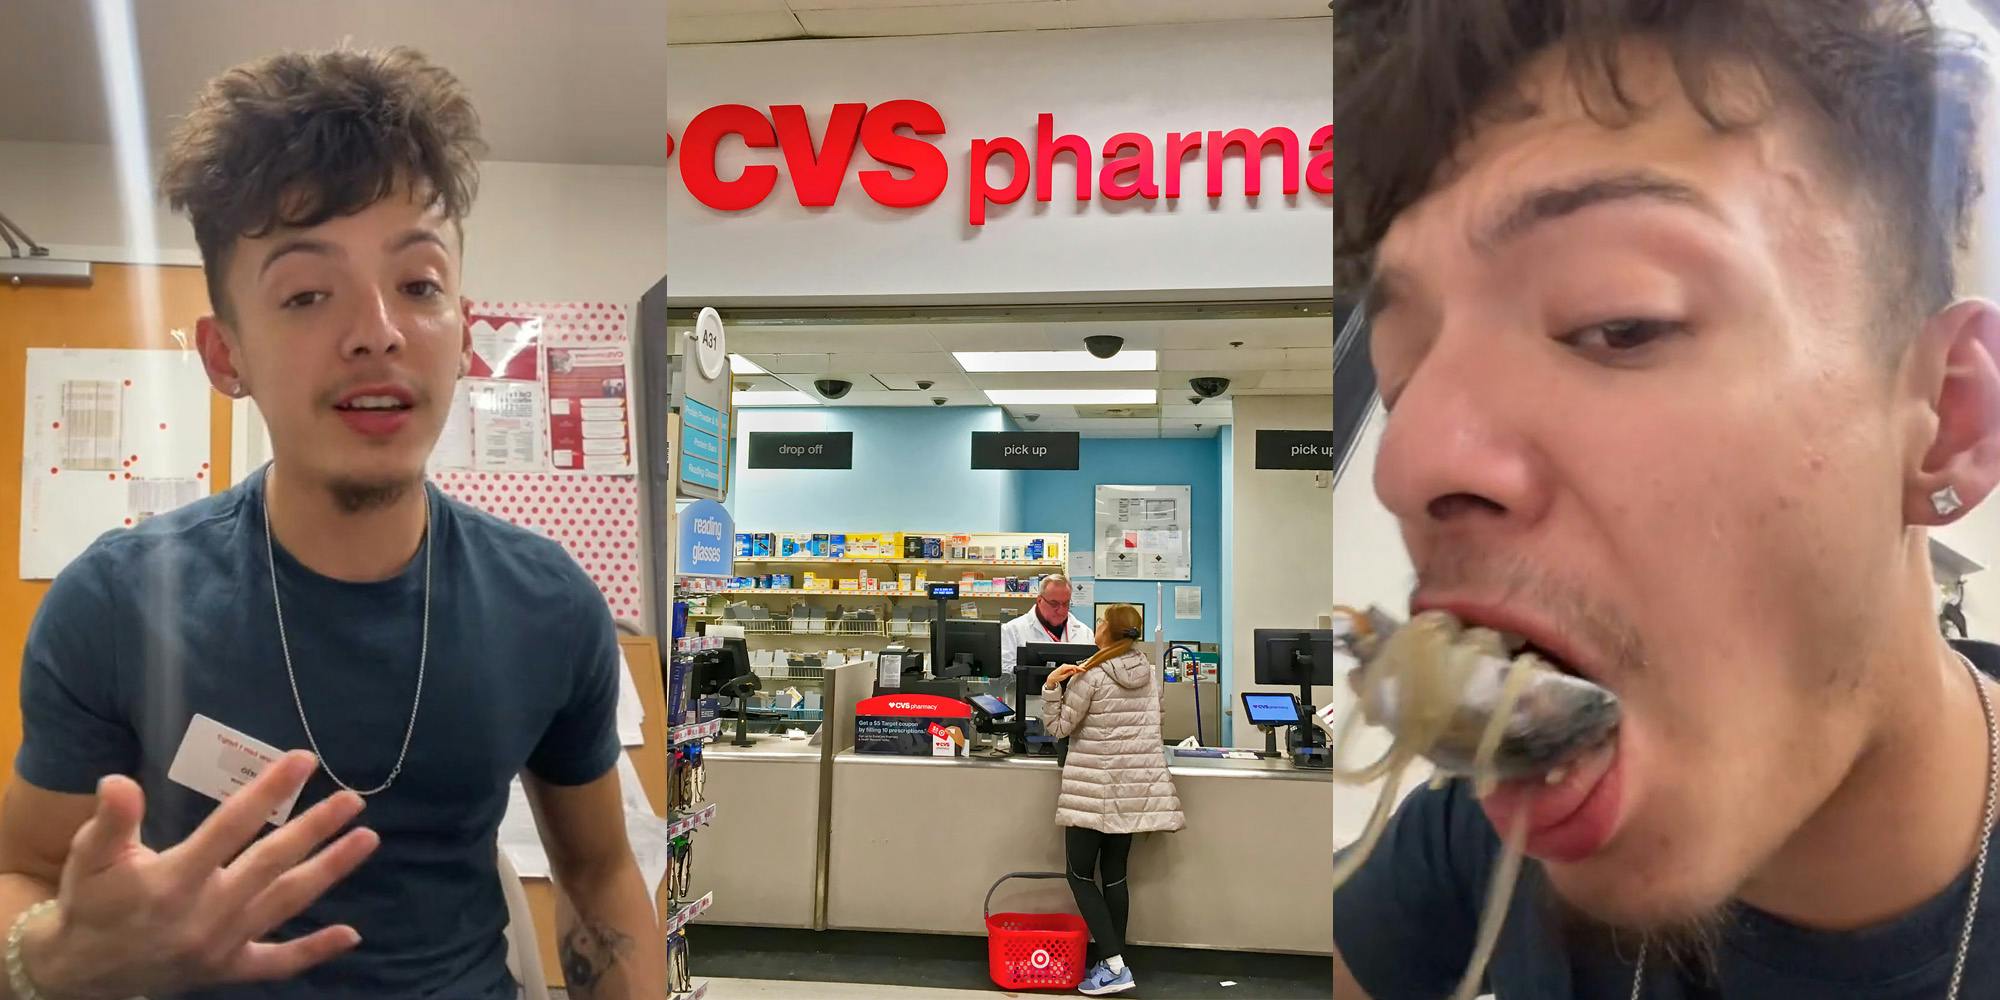 CVS worker speaking with hand out (l) CVS pharmacy (c) CVS worker eating noodles (r)